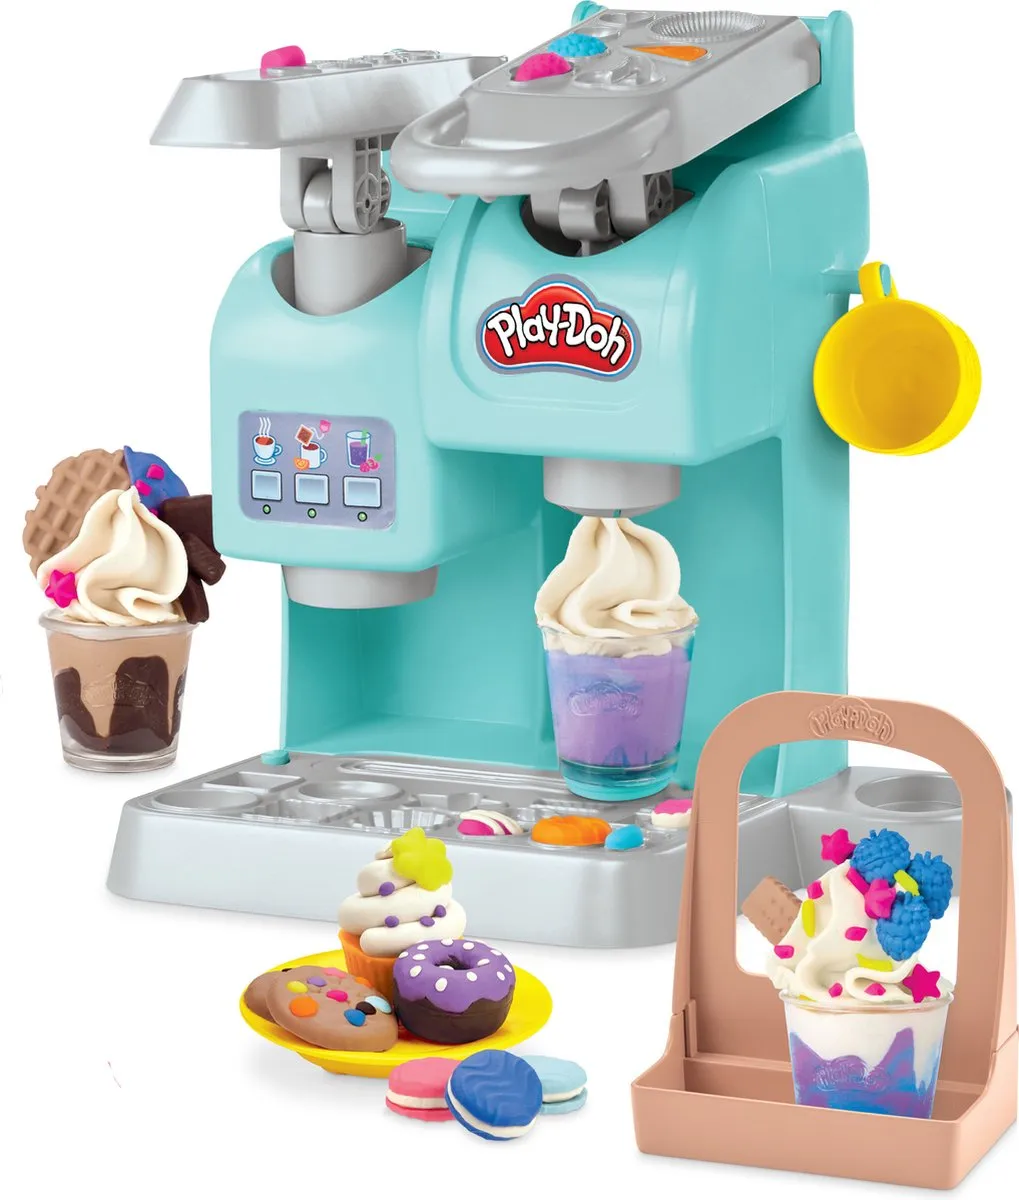 Klei Speelset- Play-Doh Super Colorful Café Playset speelgoed